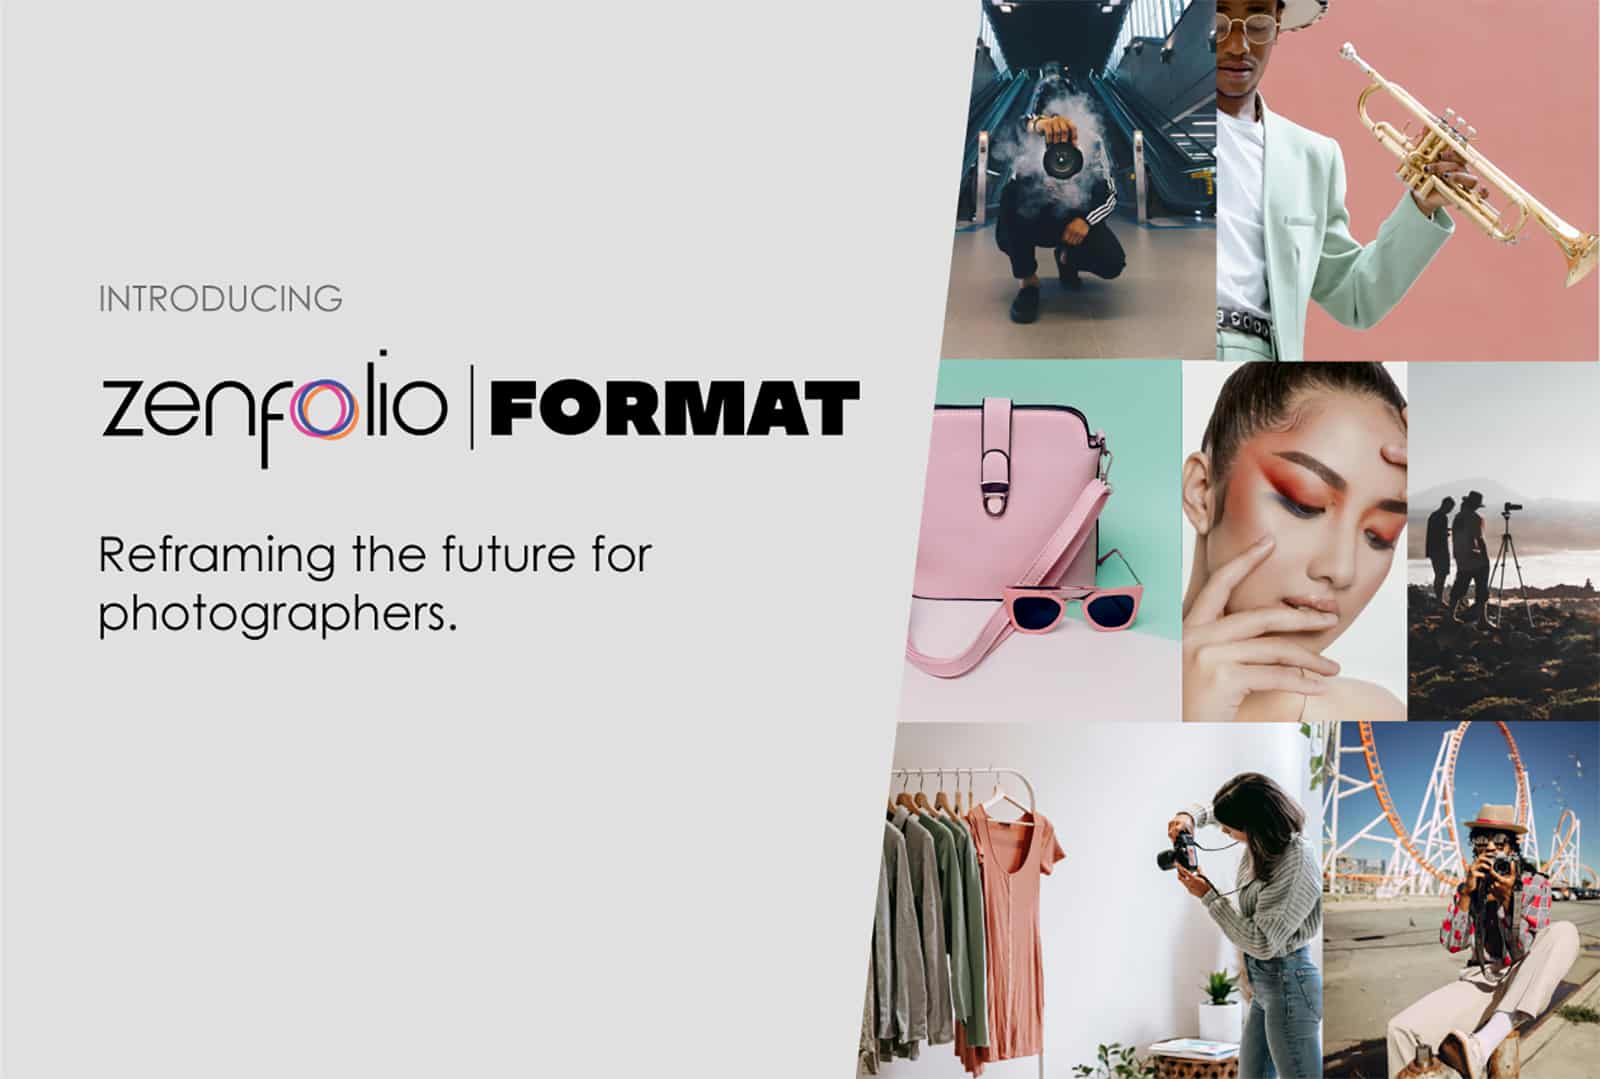 Zenfolio acquires Format to expand services for photographers.